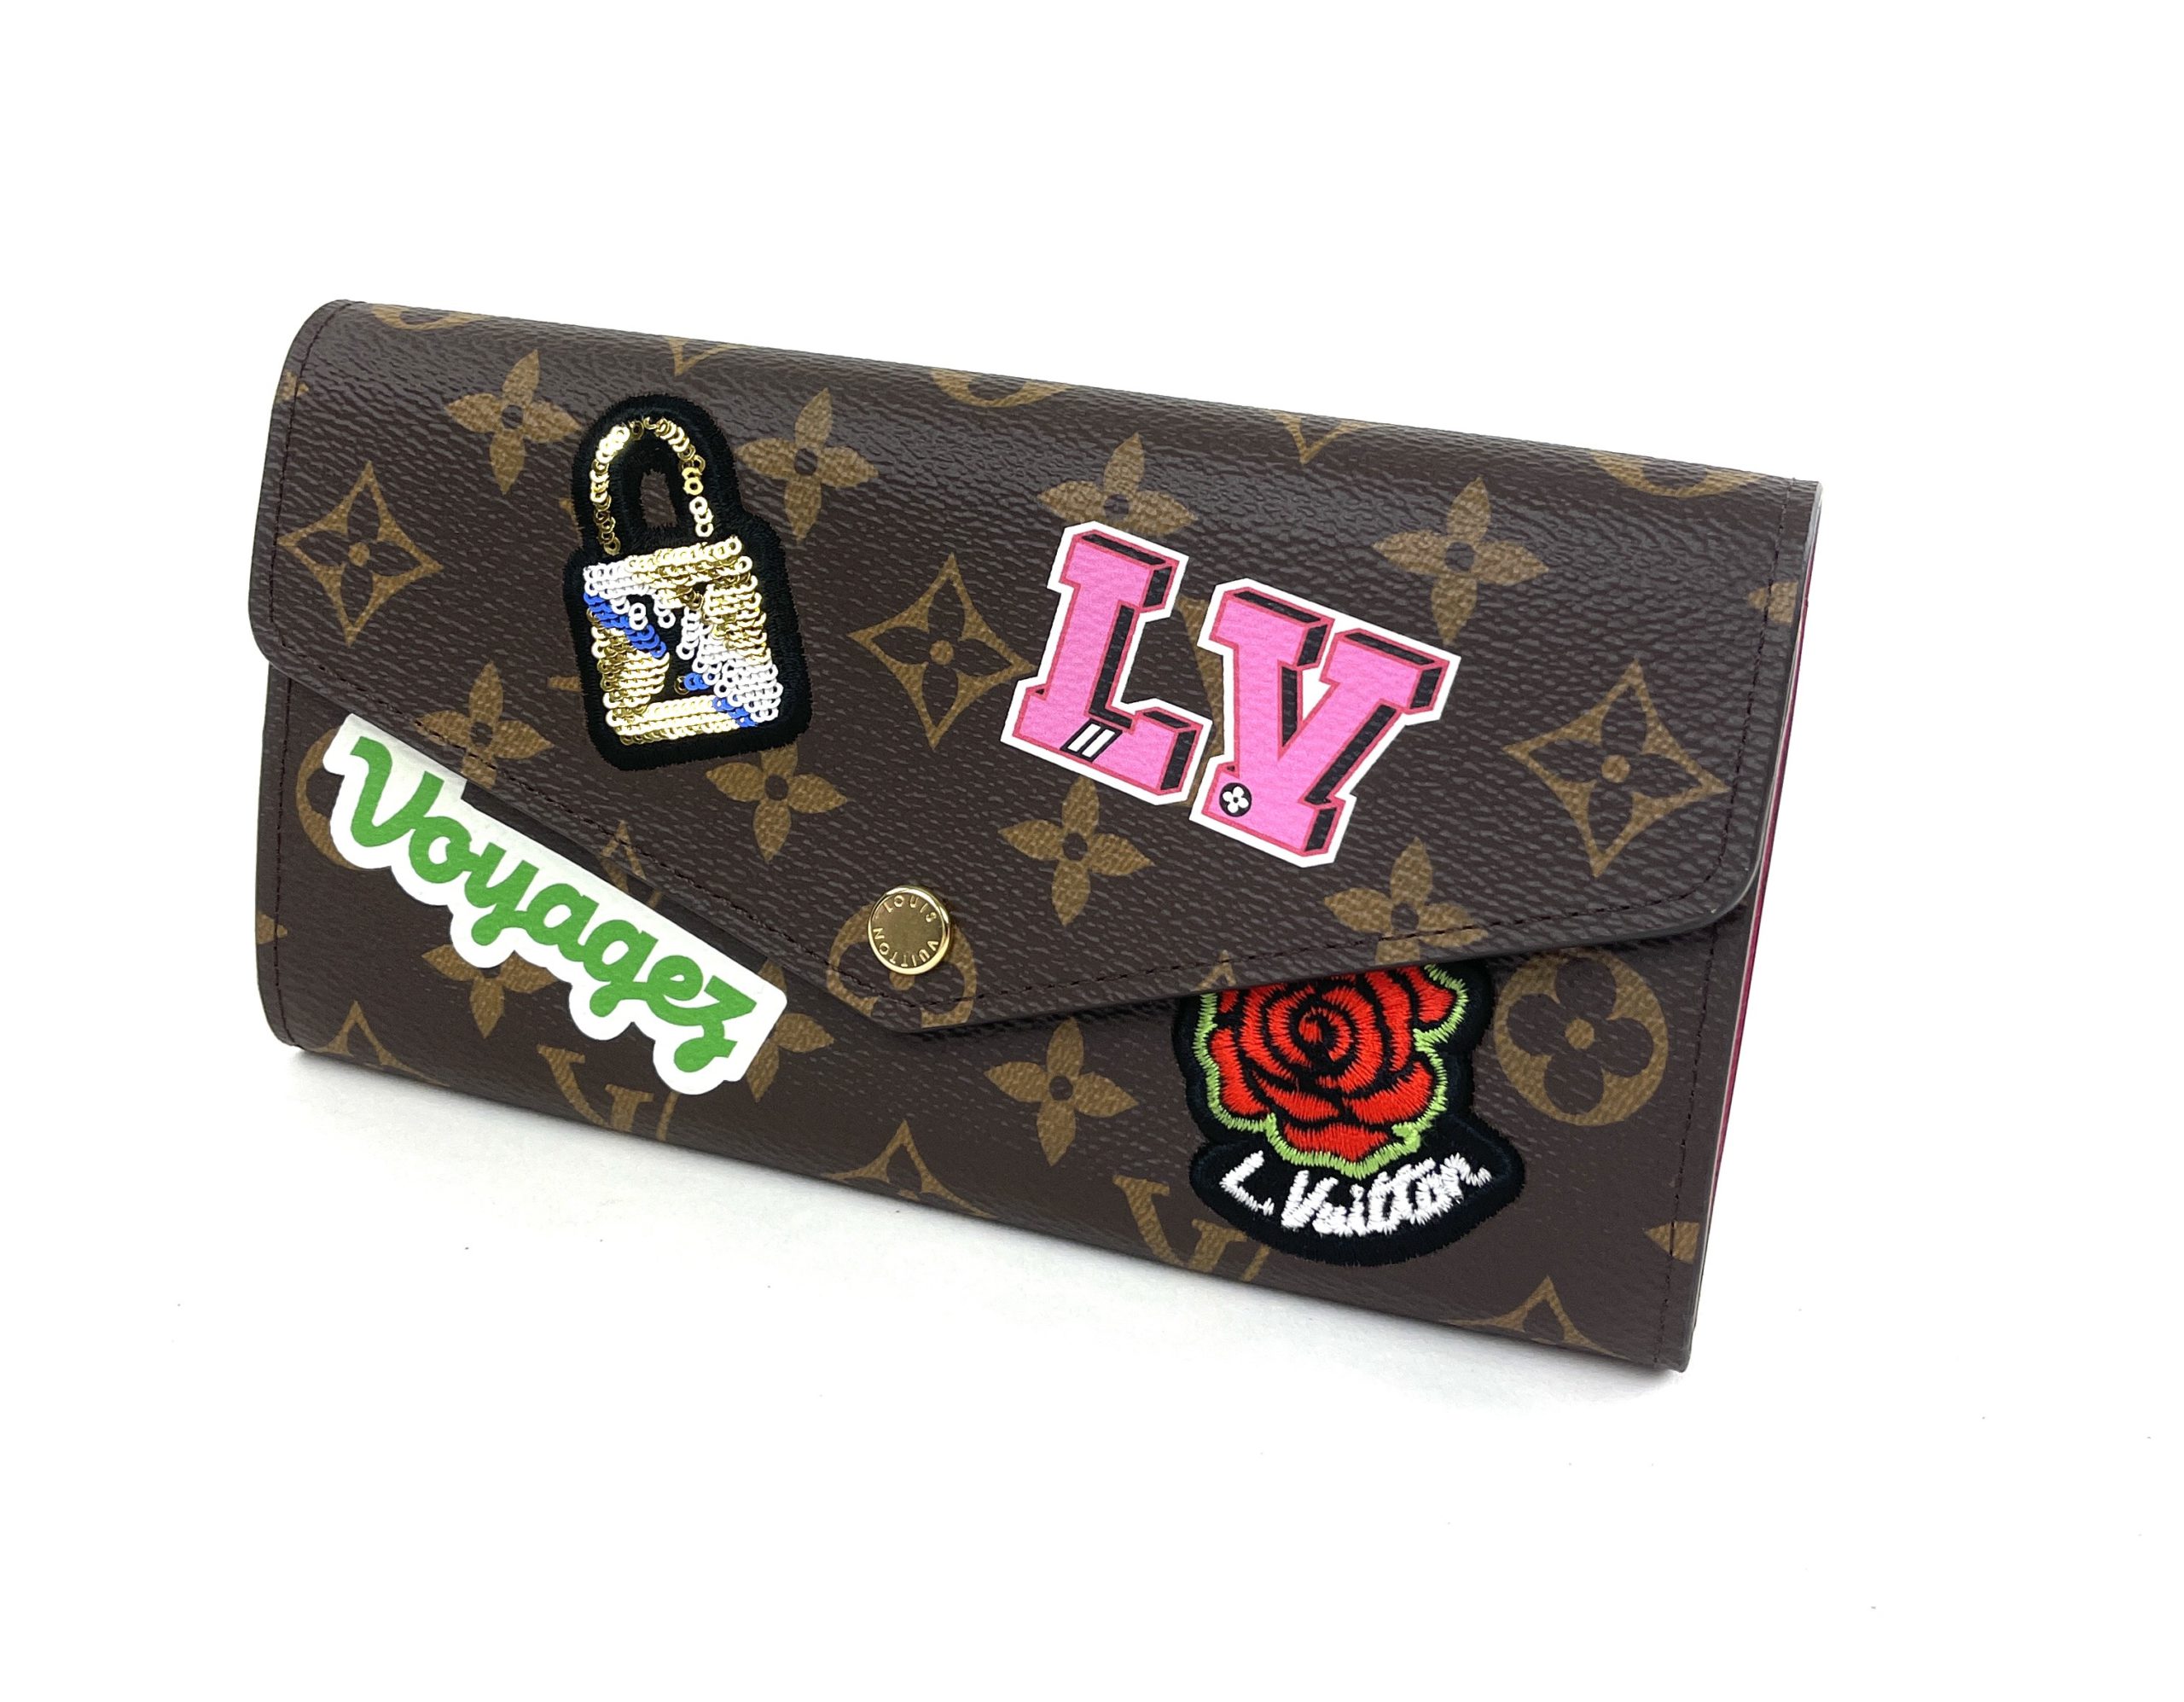 louis-vuitton limited edition wallet